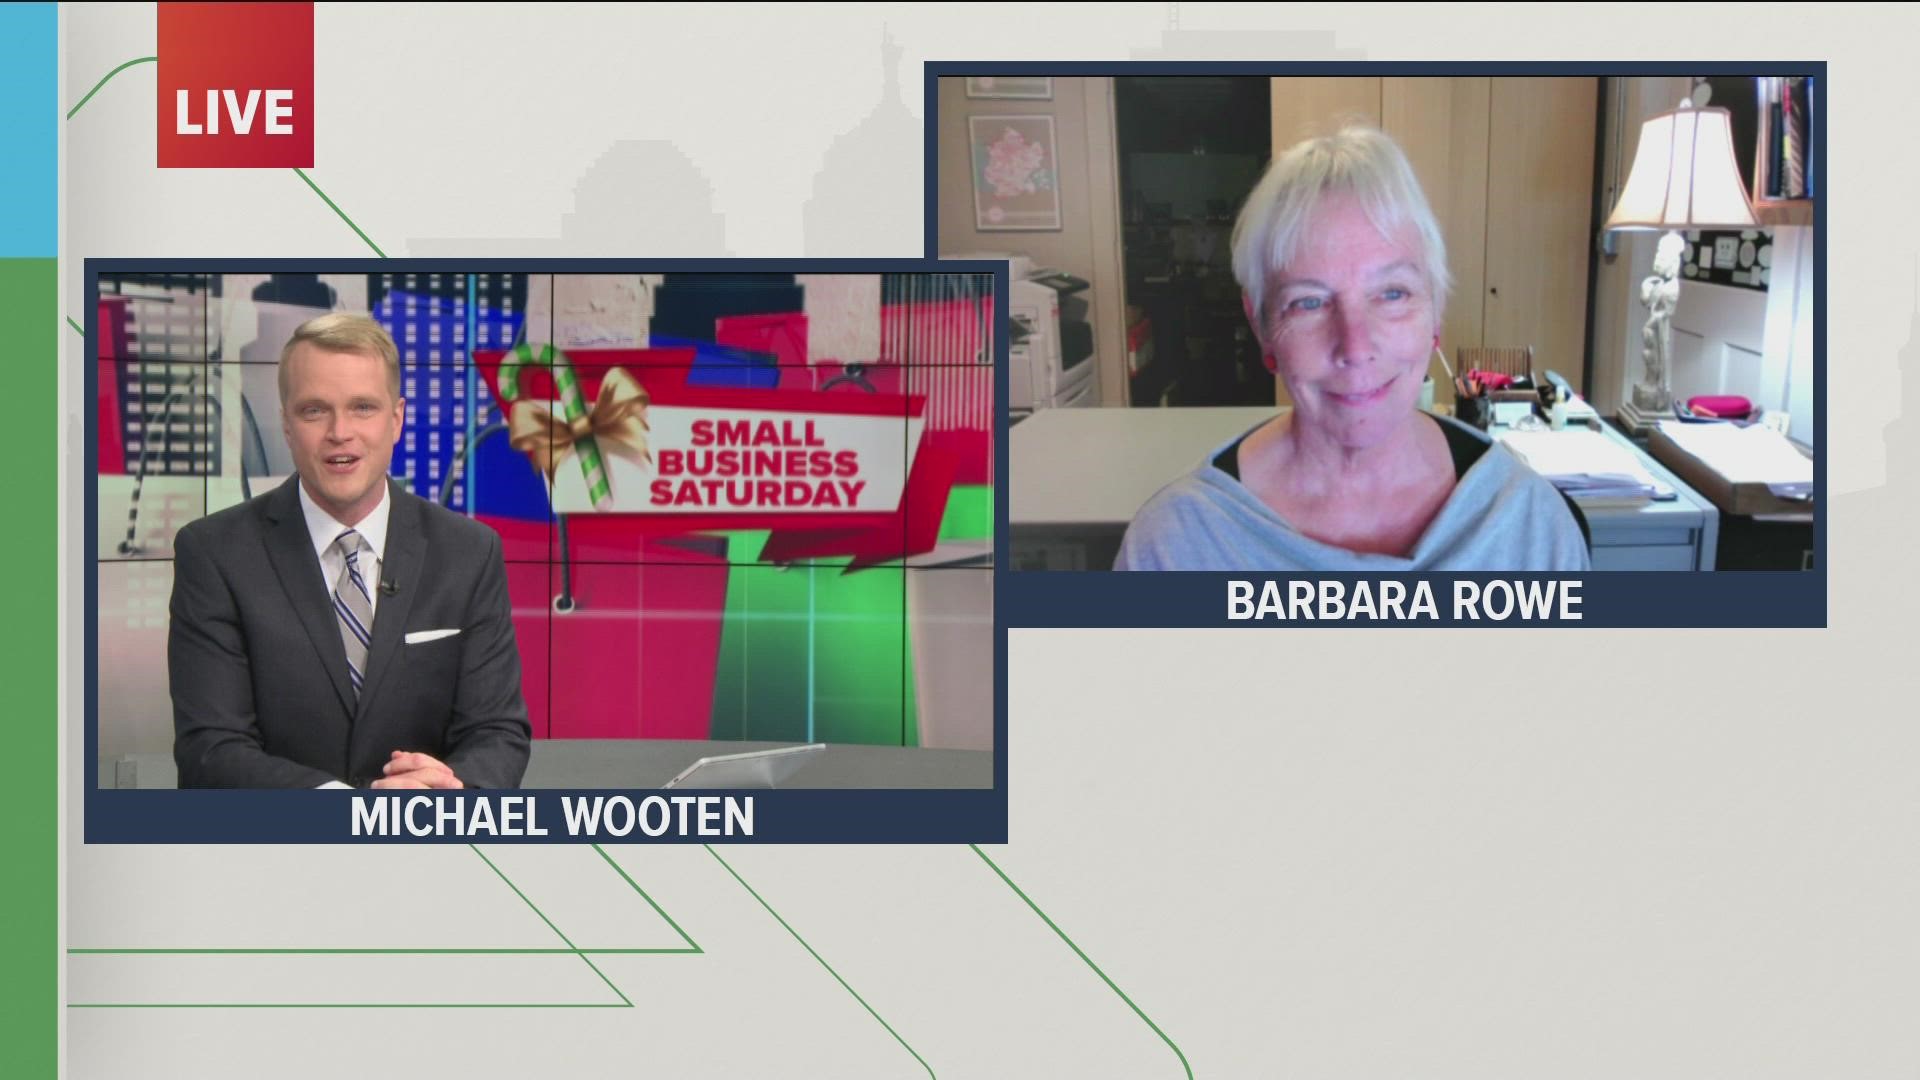 Barbara Rowe, chair of the board for Vision Niagara, joined our Town Hall to talk about Small Business Saturday and its impact across Western New York.